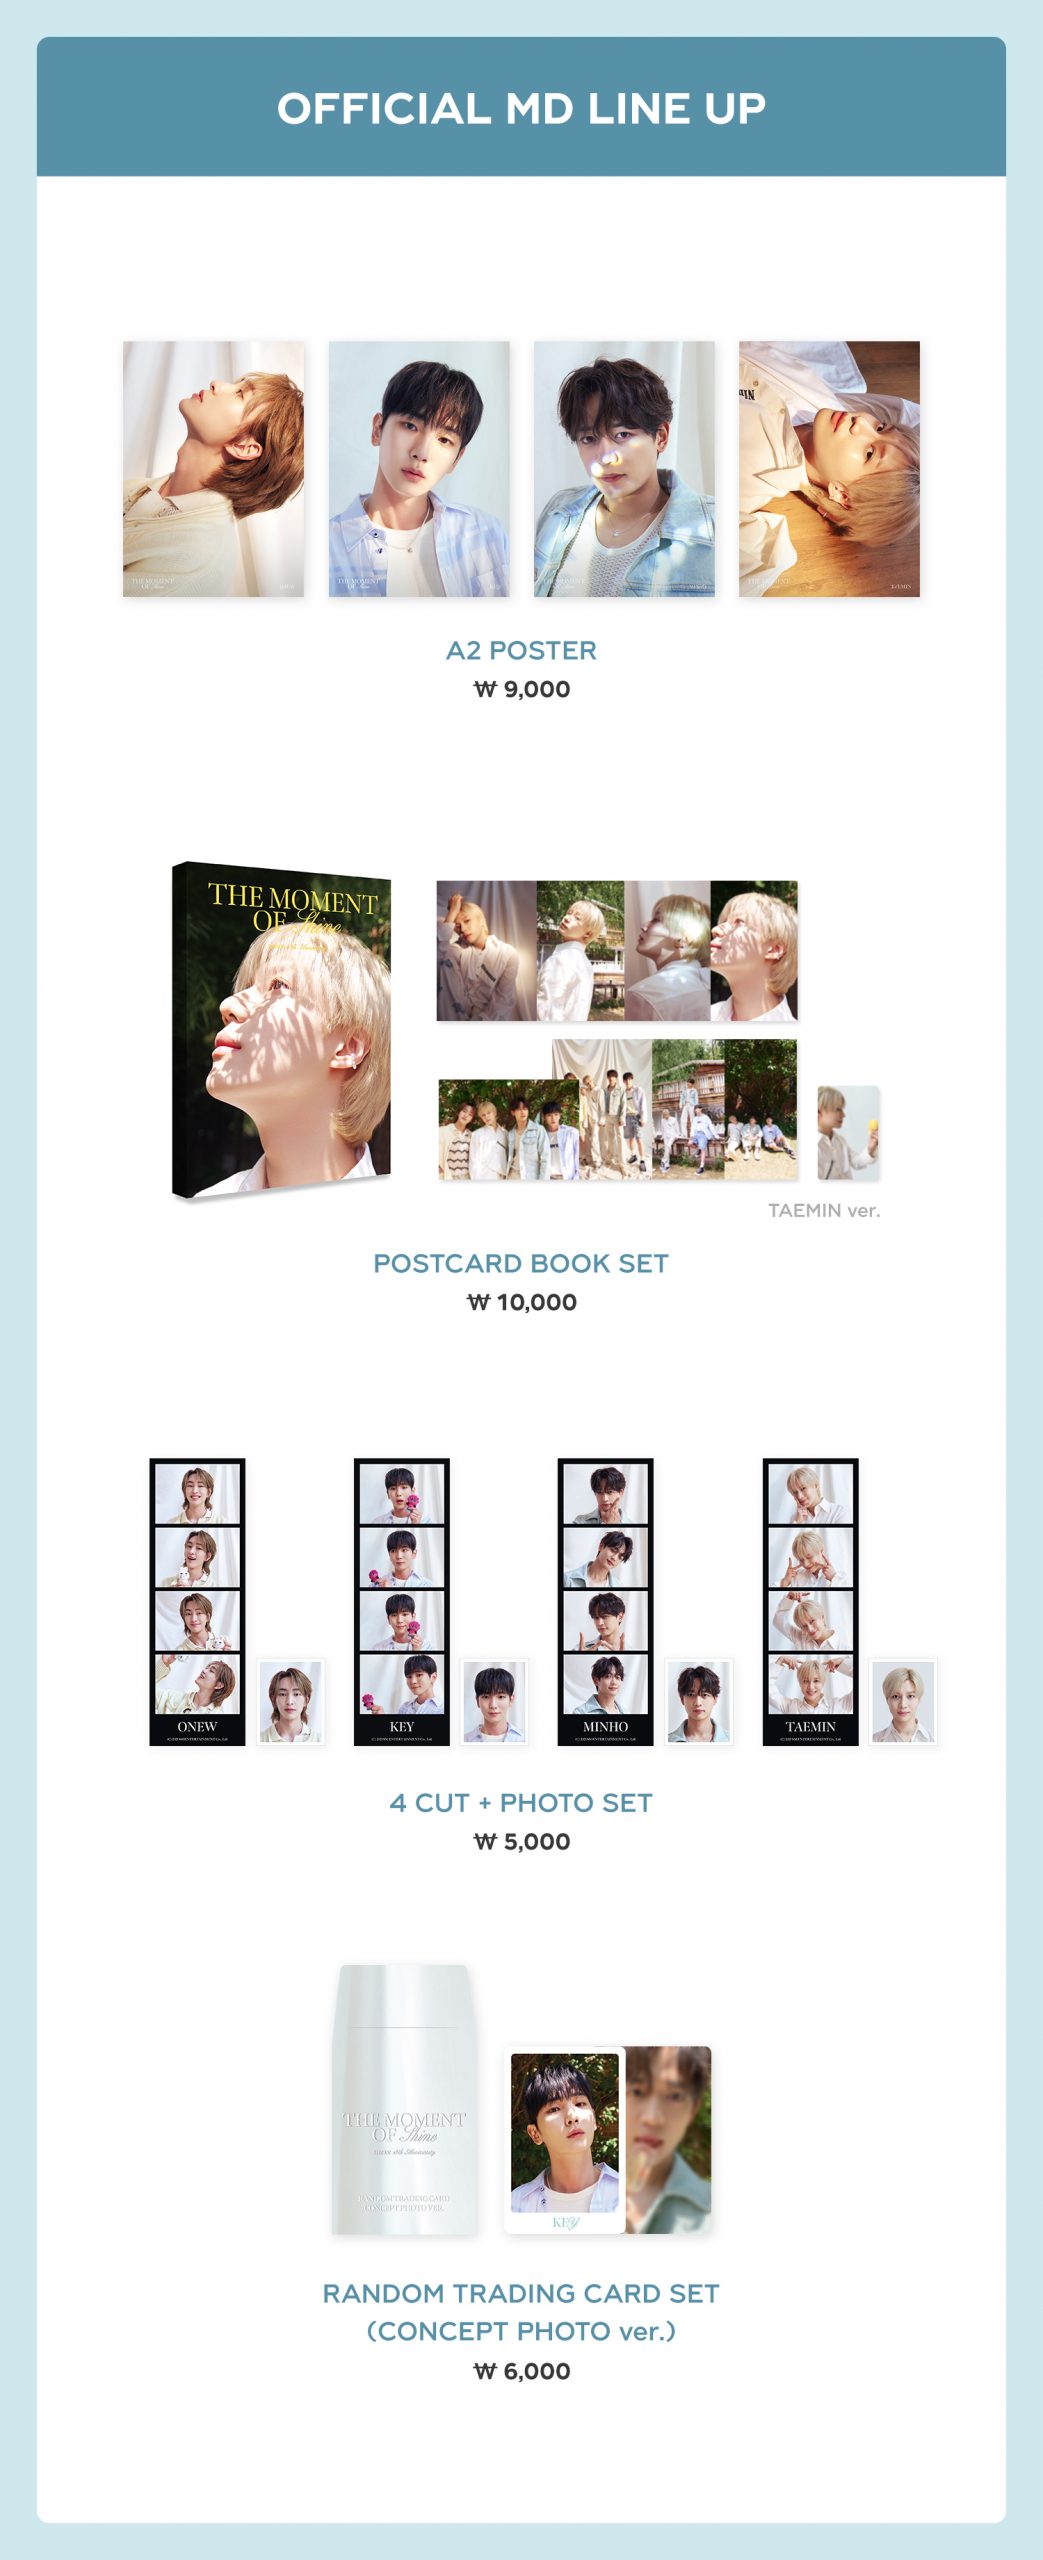 SHINee - [THE MOMENT OF Shine] POP-UP STORE OFFICIAL MD 